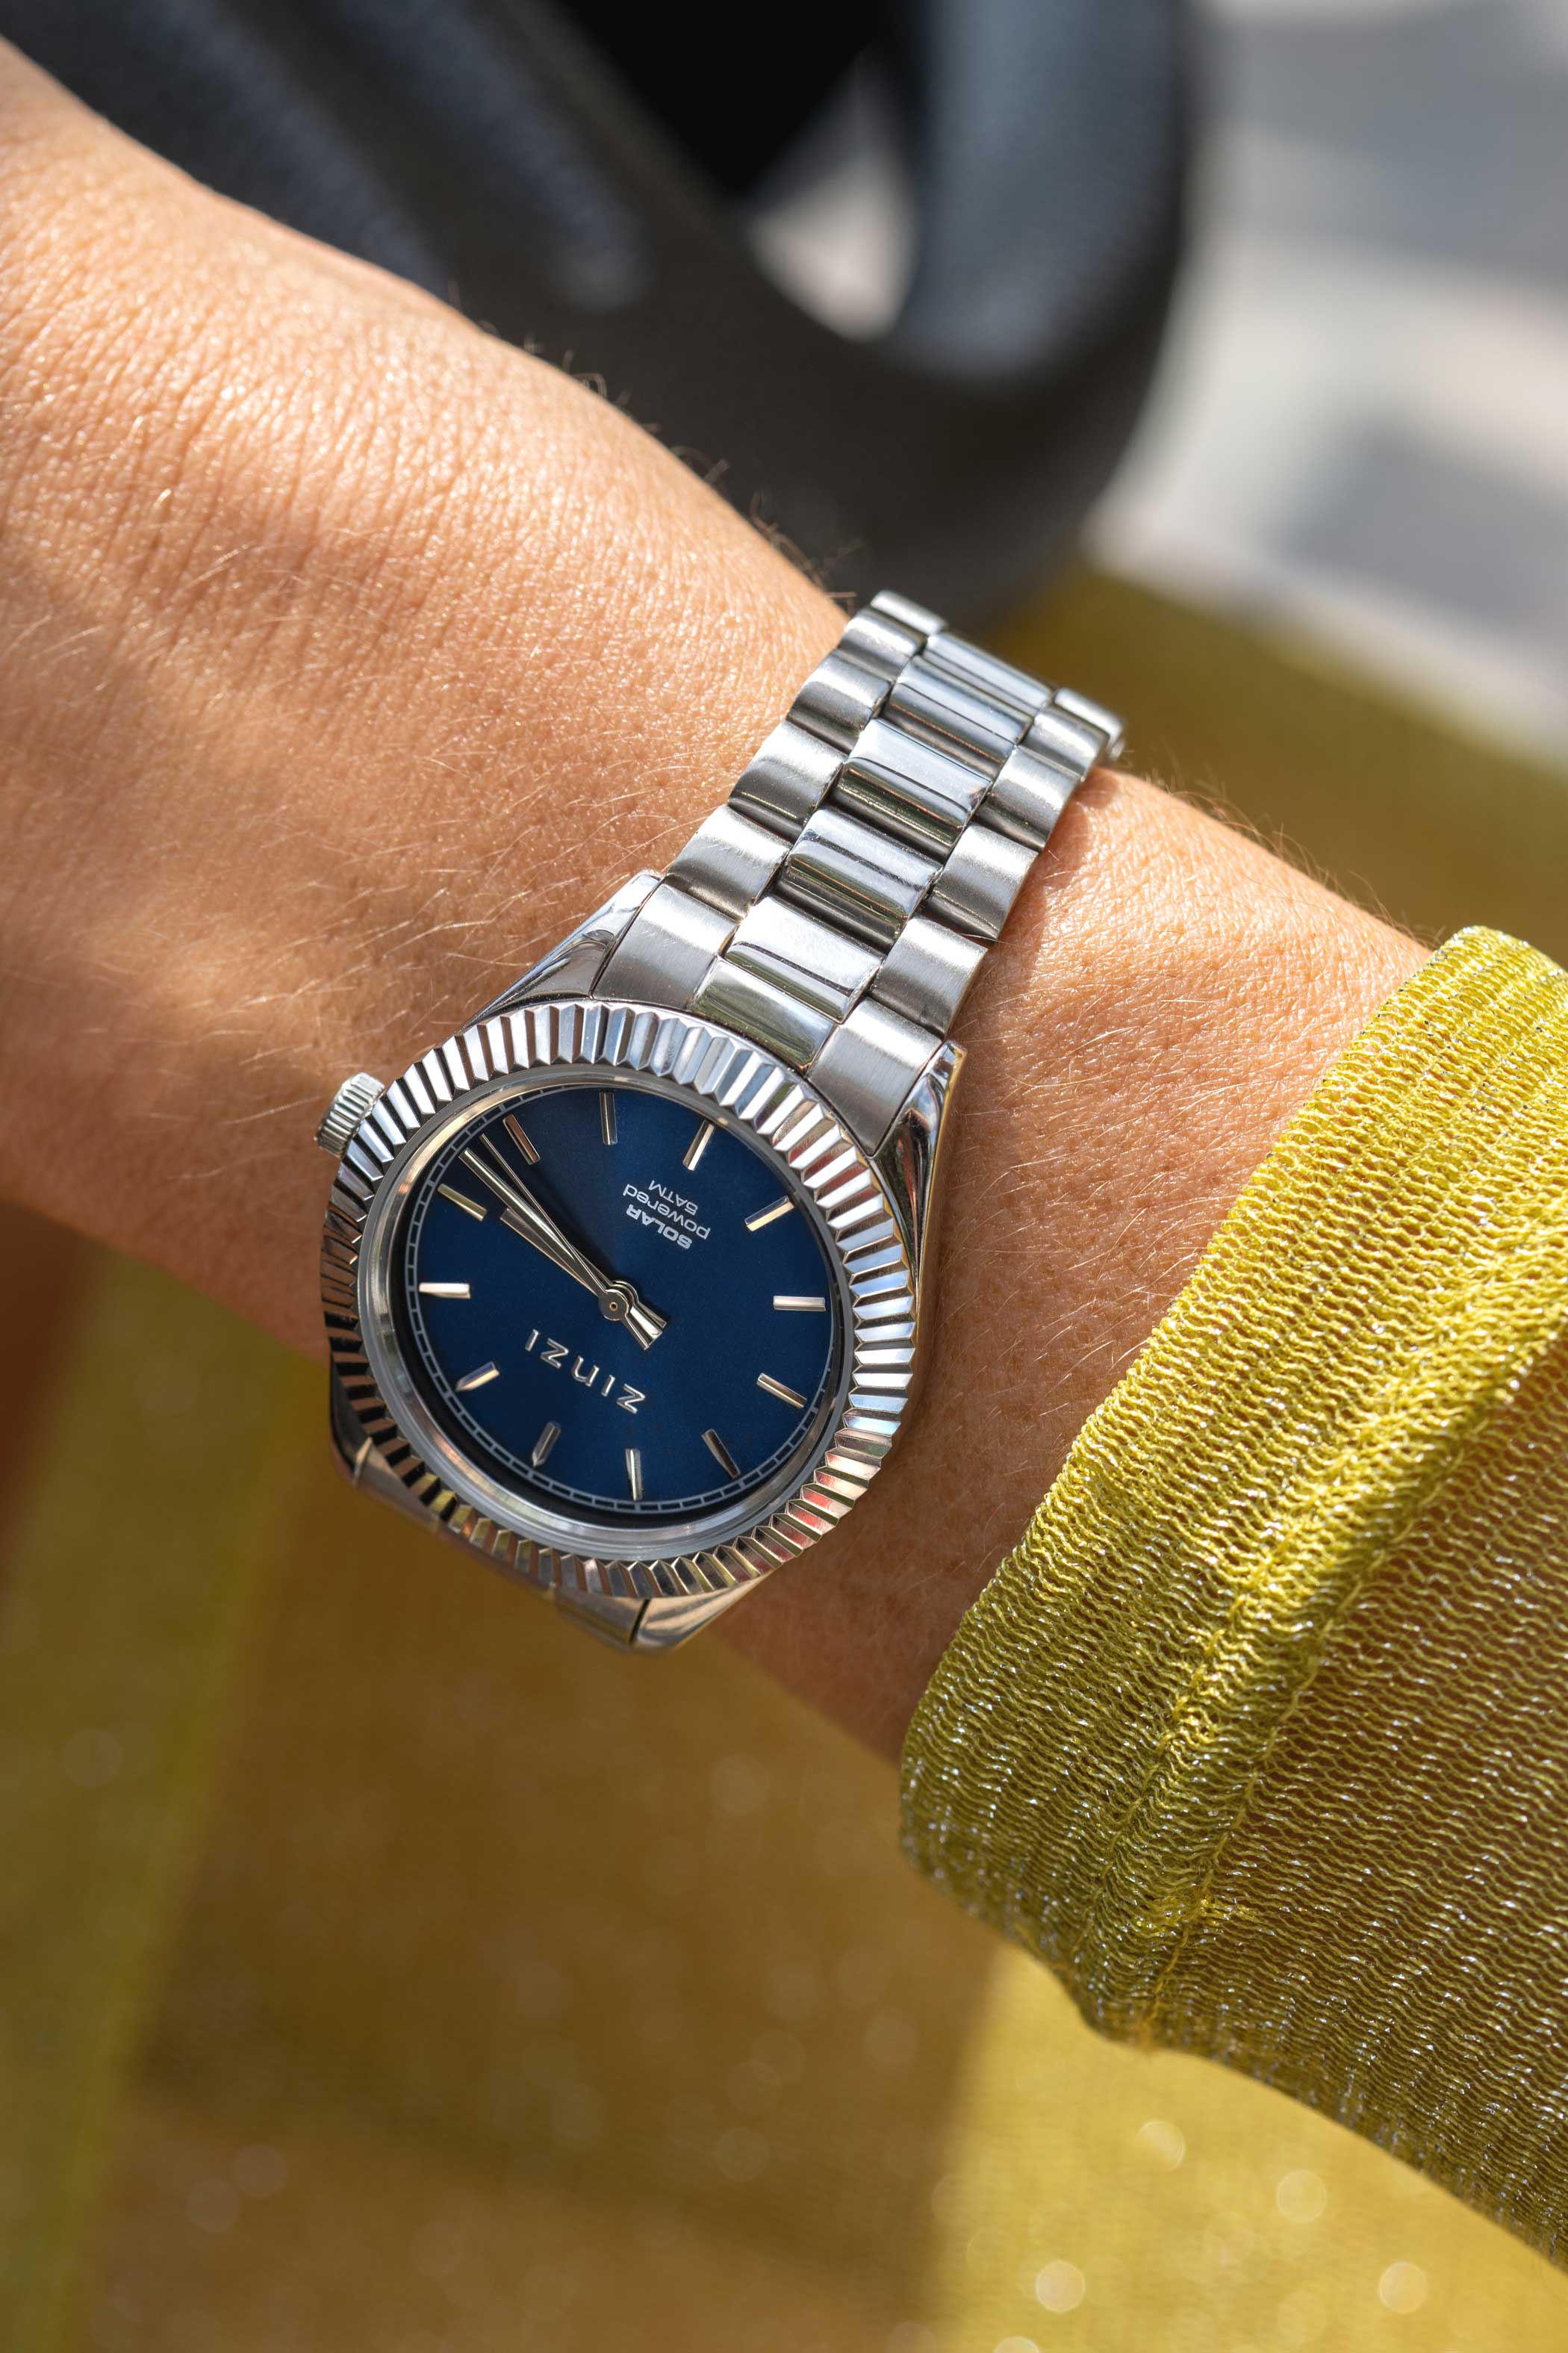 ZINZI Solaris Watch 35mm Blue Dial Stainless Steel Case and Chain Strap (works on sun- and artificial light) ZIW2155